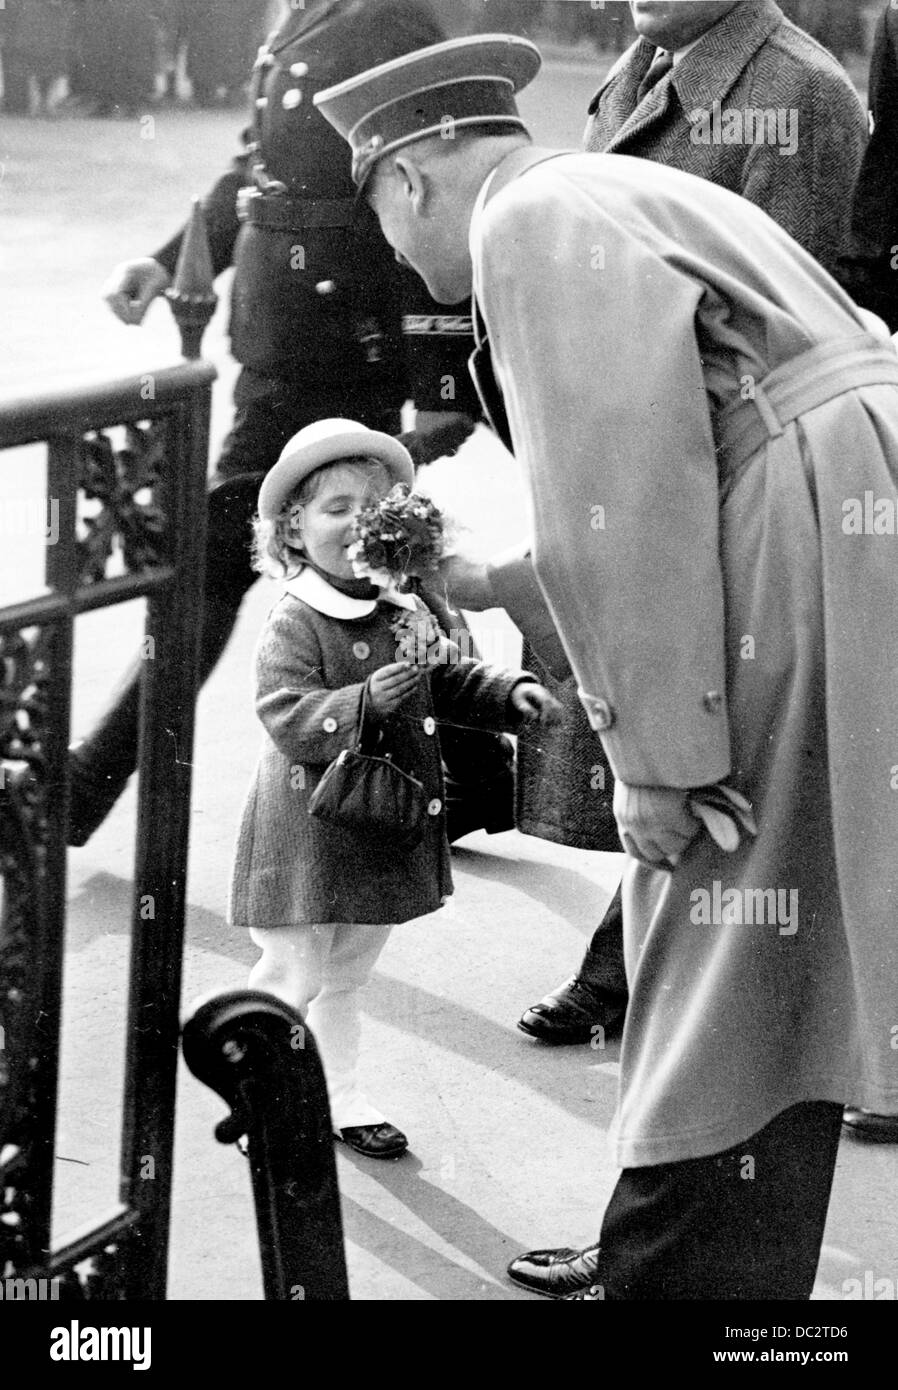 The image from the Nazi Propaganda! shows Adolf Hitler receiving flowers from a little girl on his way to a reception at the Ministry of Public Enlightenment and Propaganda in Berlin, Germany, on the occasion of Joseph Goebbel's 40th birthday on 29 October 1937. Fotoarchiv für Zeitgeschichte Stock Photo